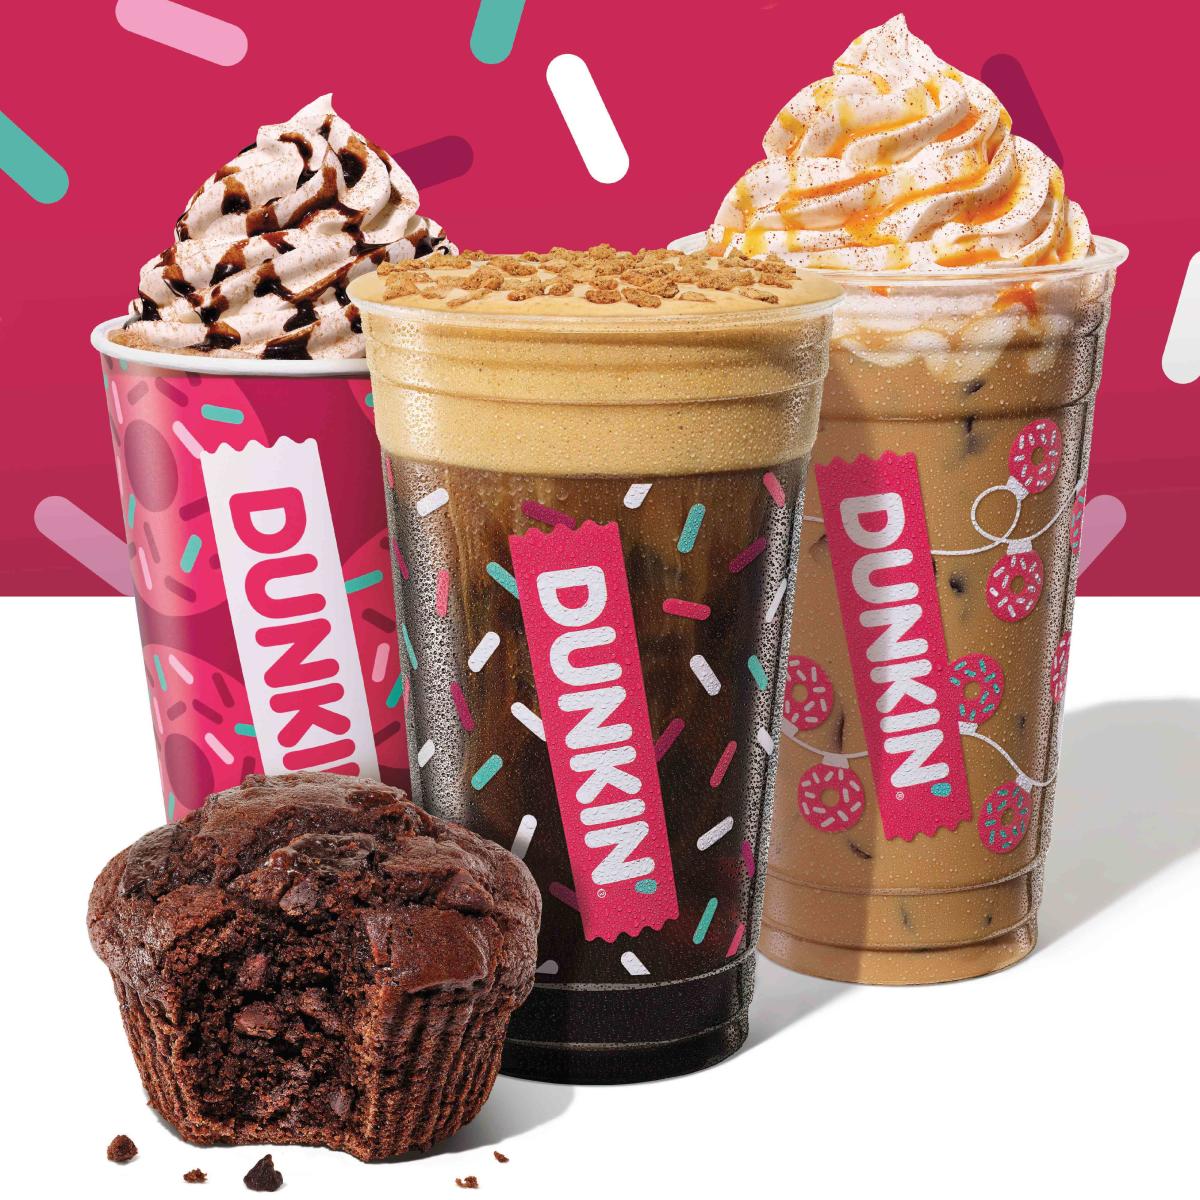 Dunkin' Just Released Its Holiday Menu, and a Fan Favorite Is Returning